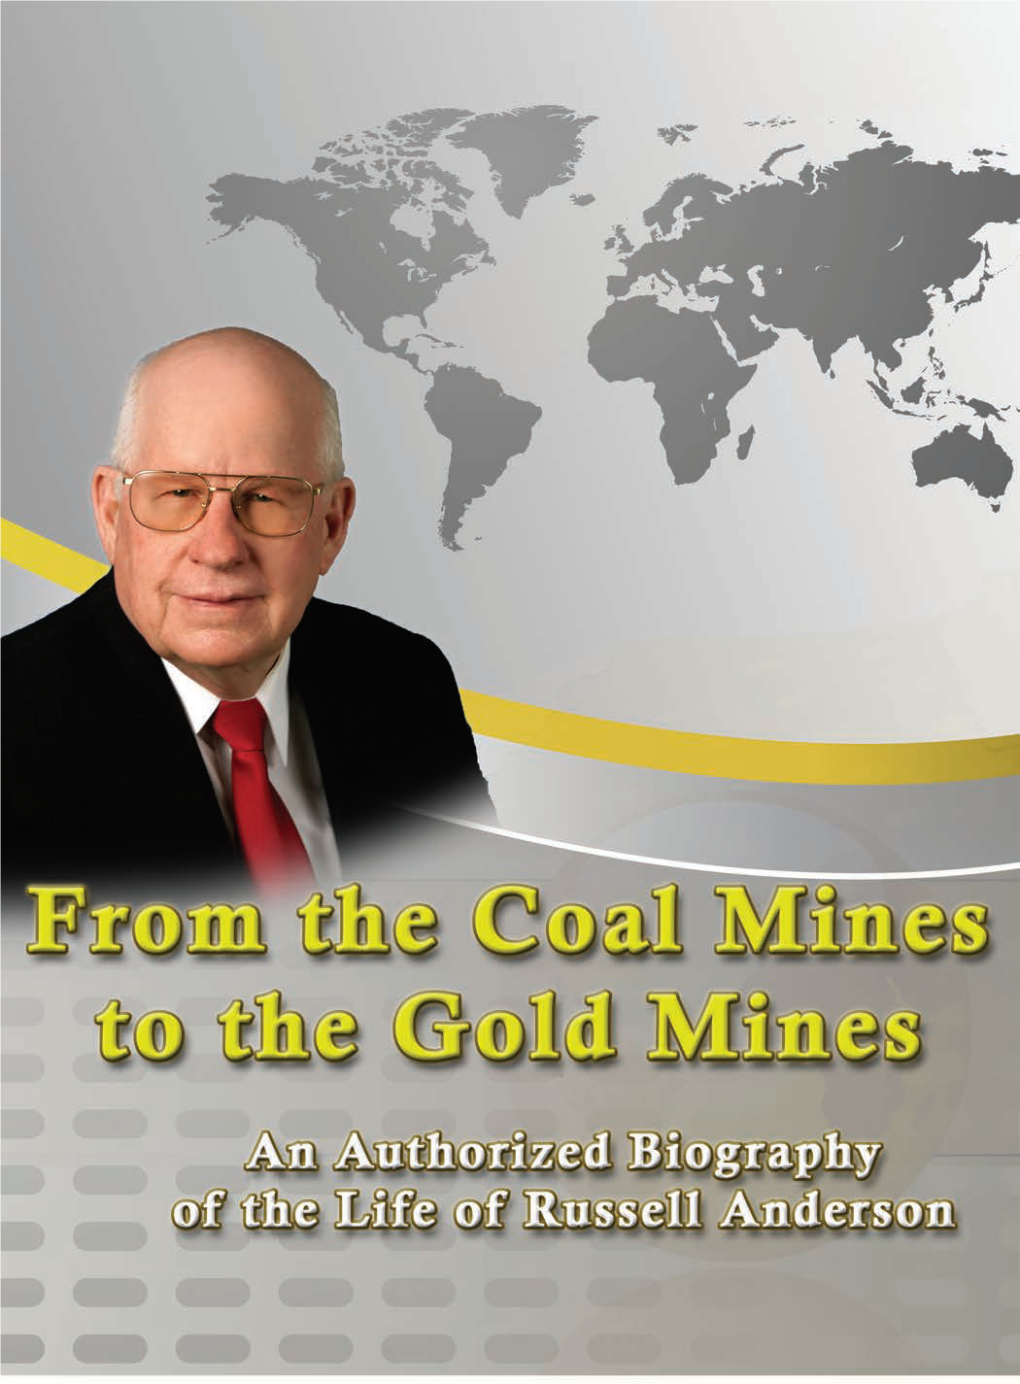 From the Coal Mines to the Gold Mines